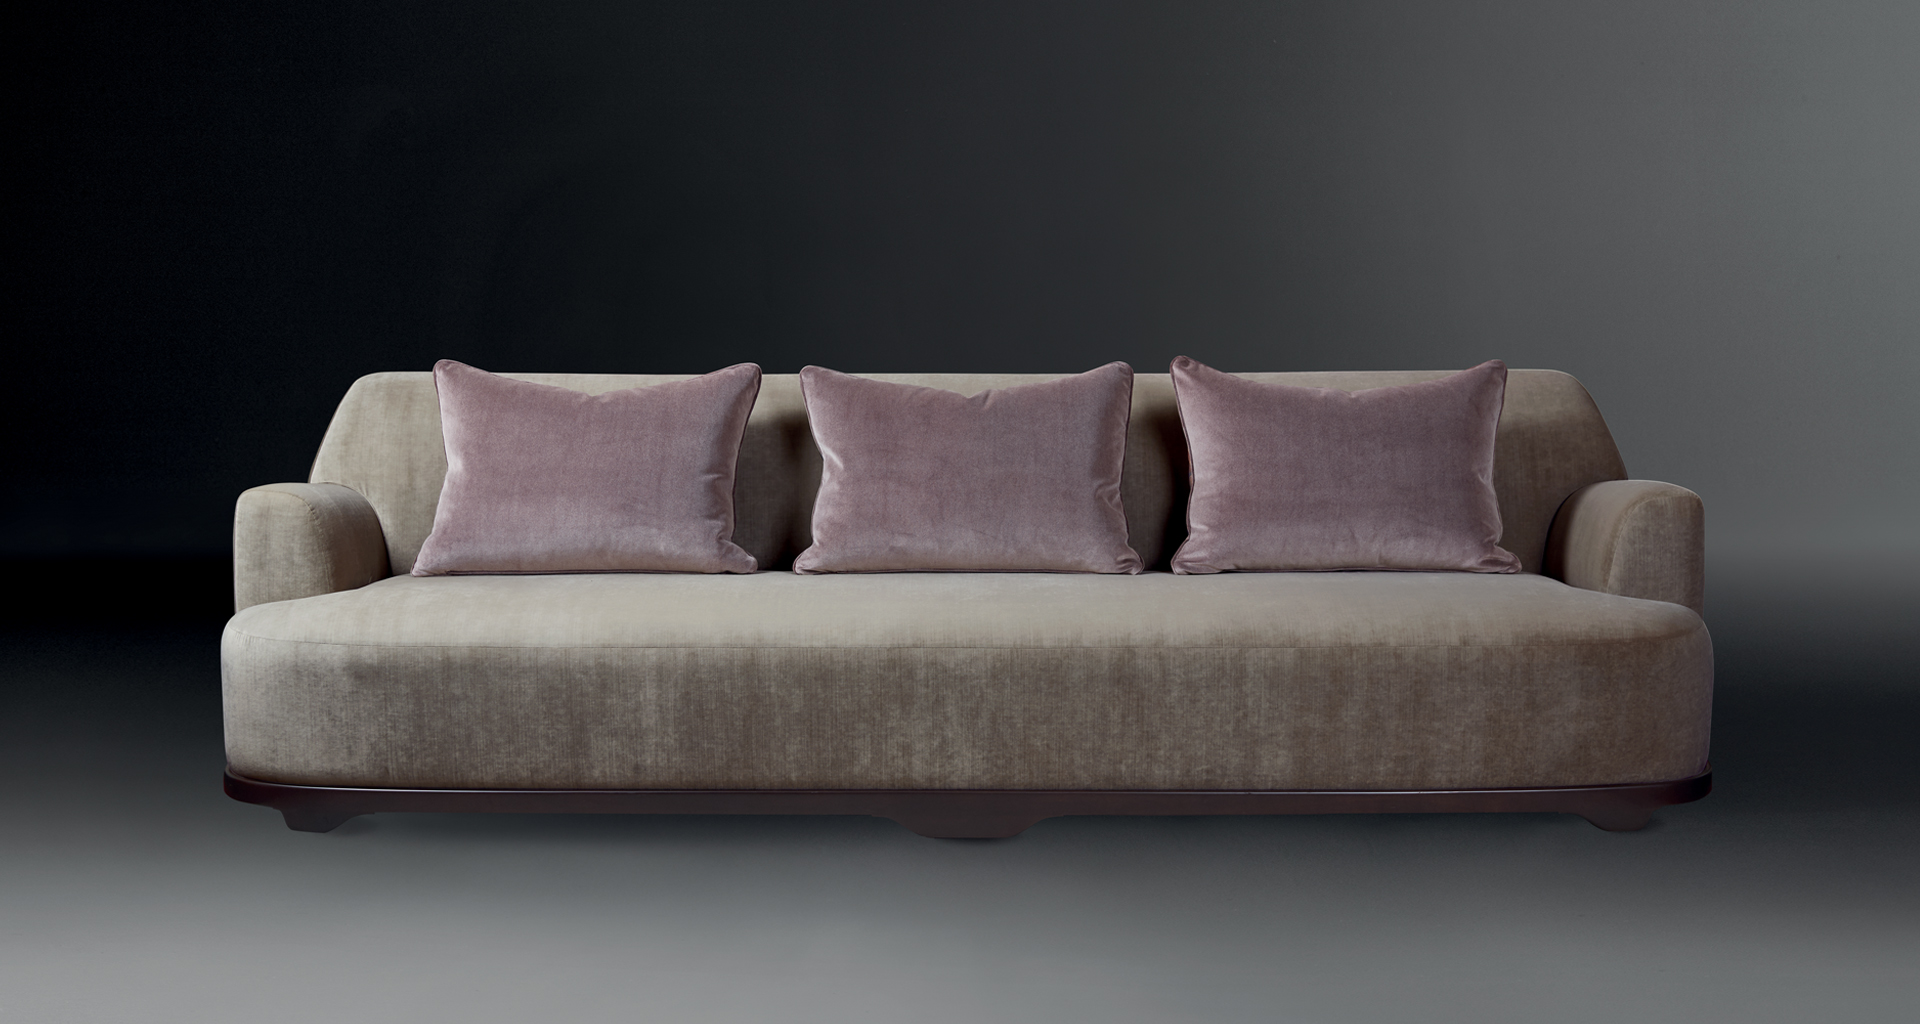 Dorian is a wooden sofa covered in fabric or leather that can be customized in size and shape, from Promemoria's catalogue | Promemoria